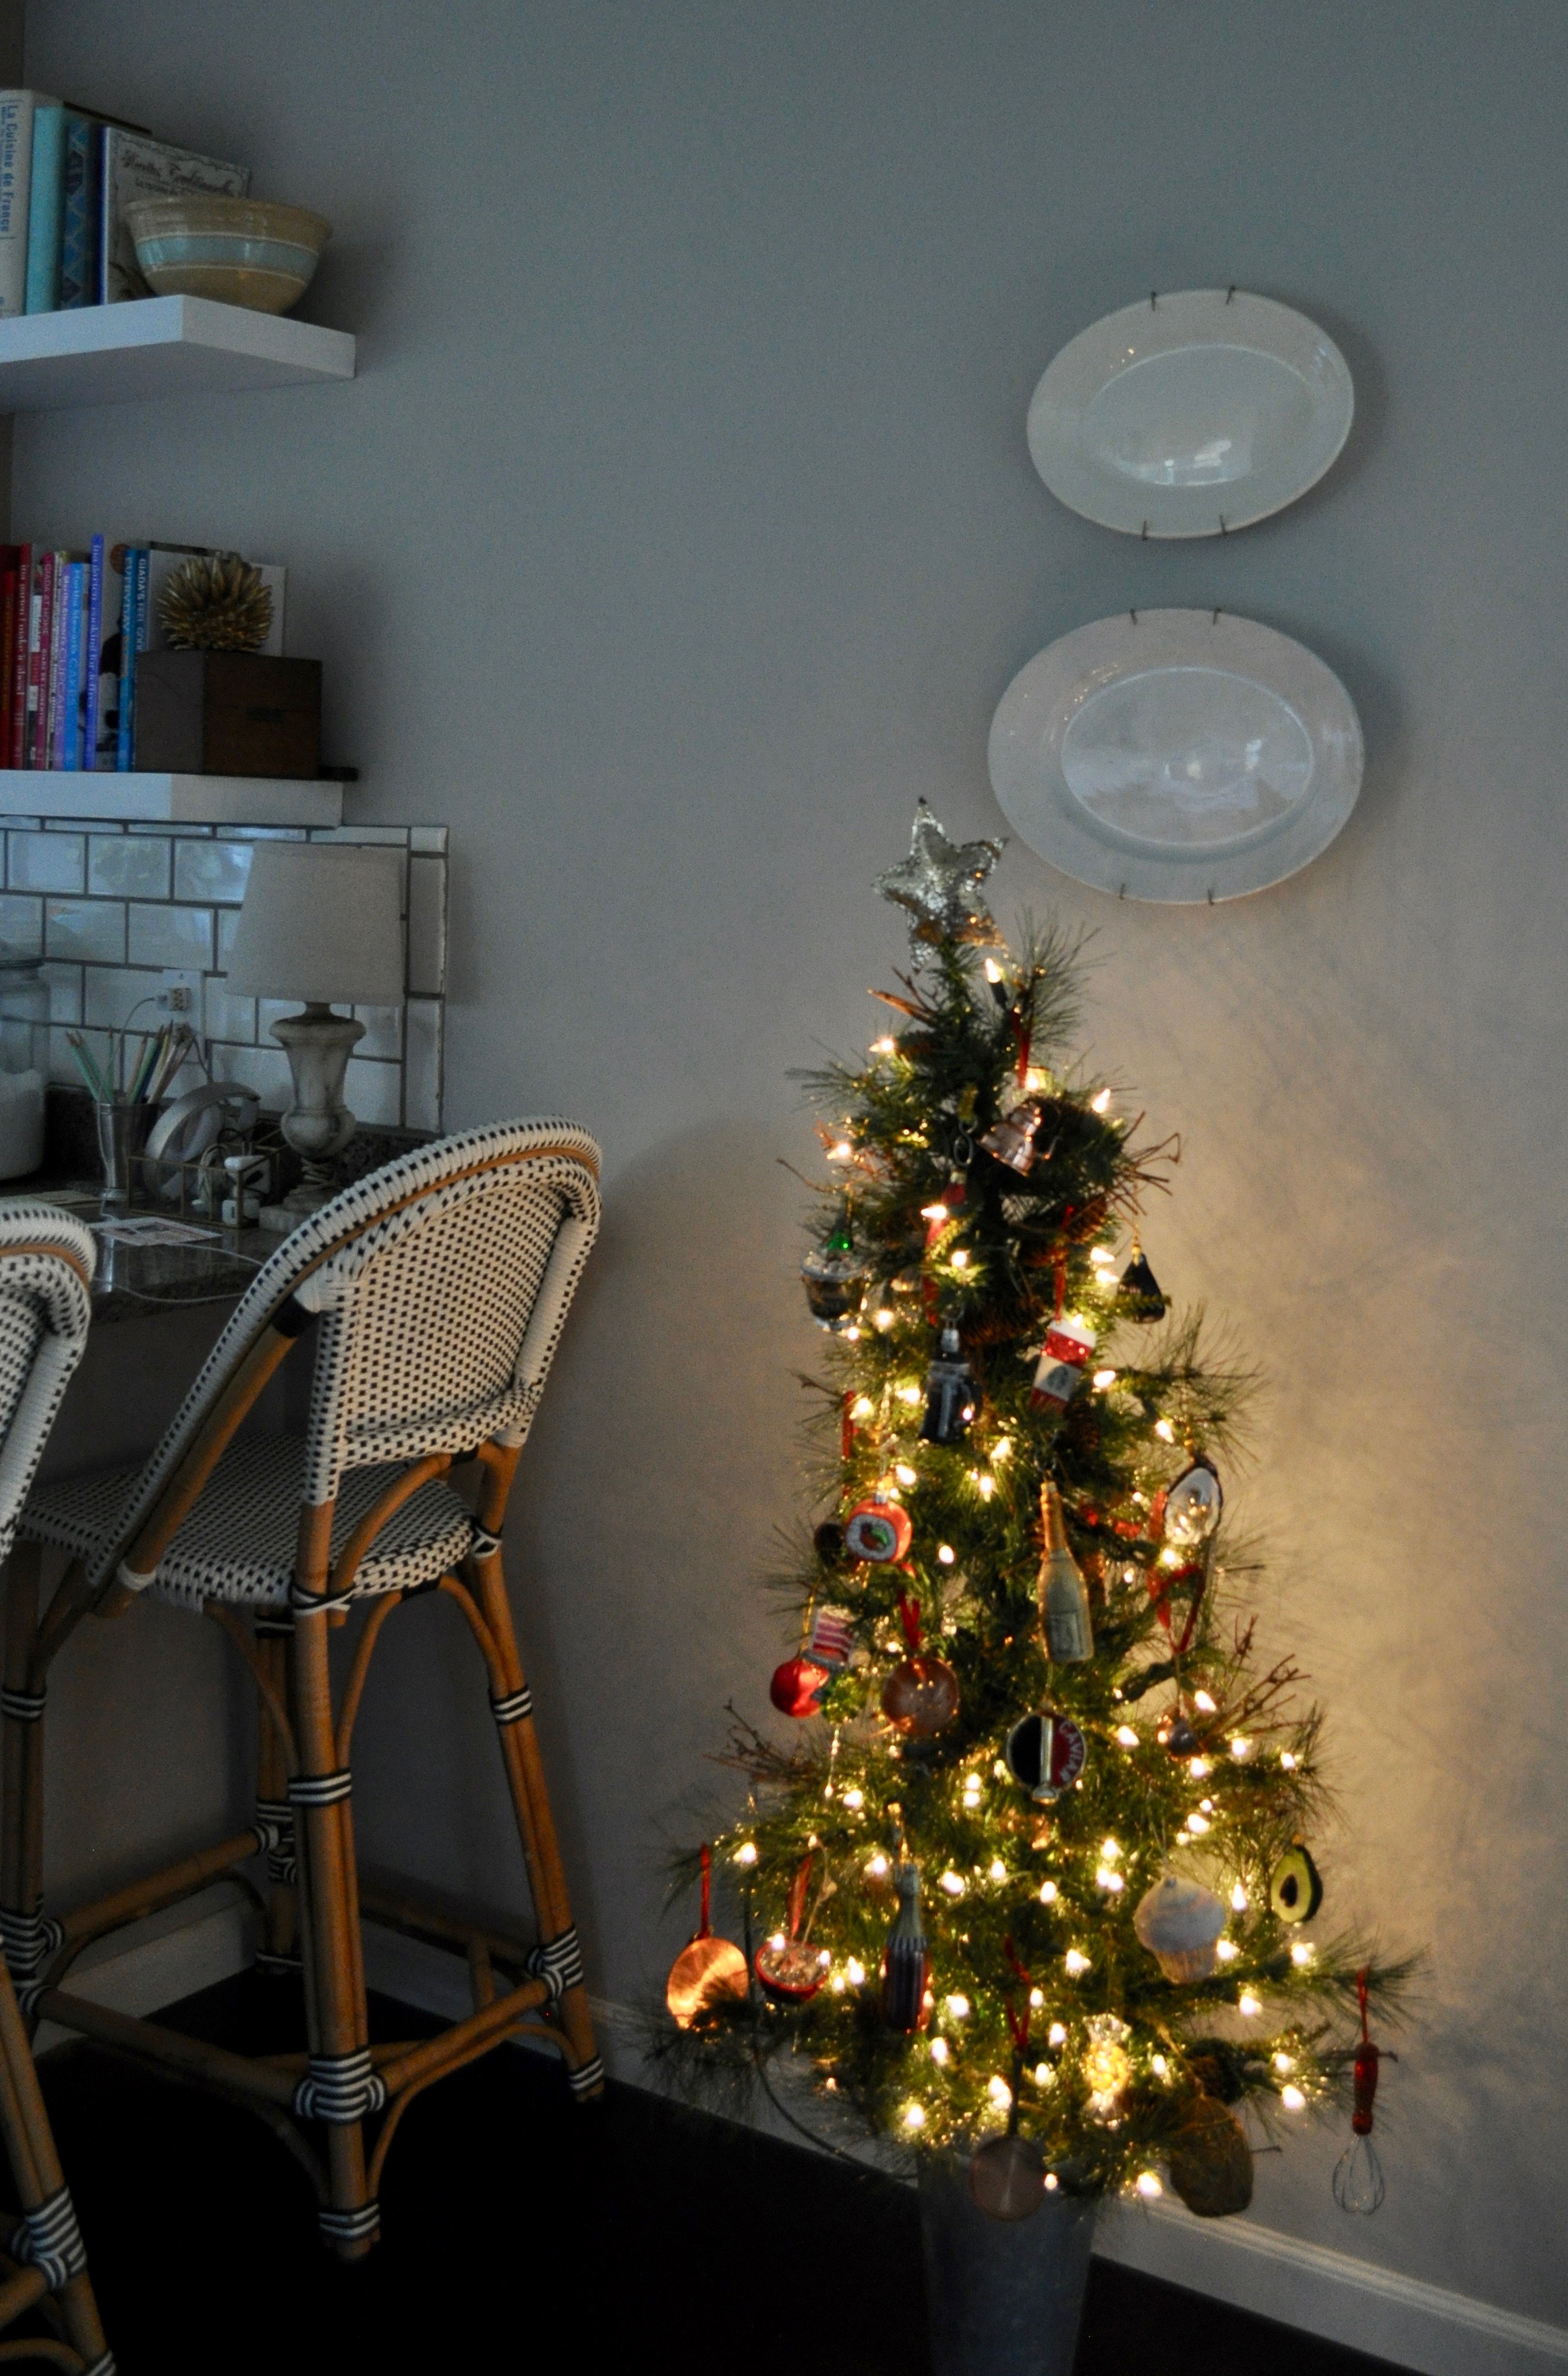 Kitchen tree (held in the middle by duct tape - shhhh)